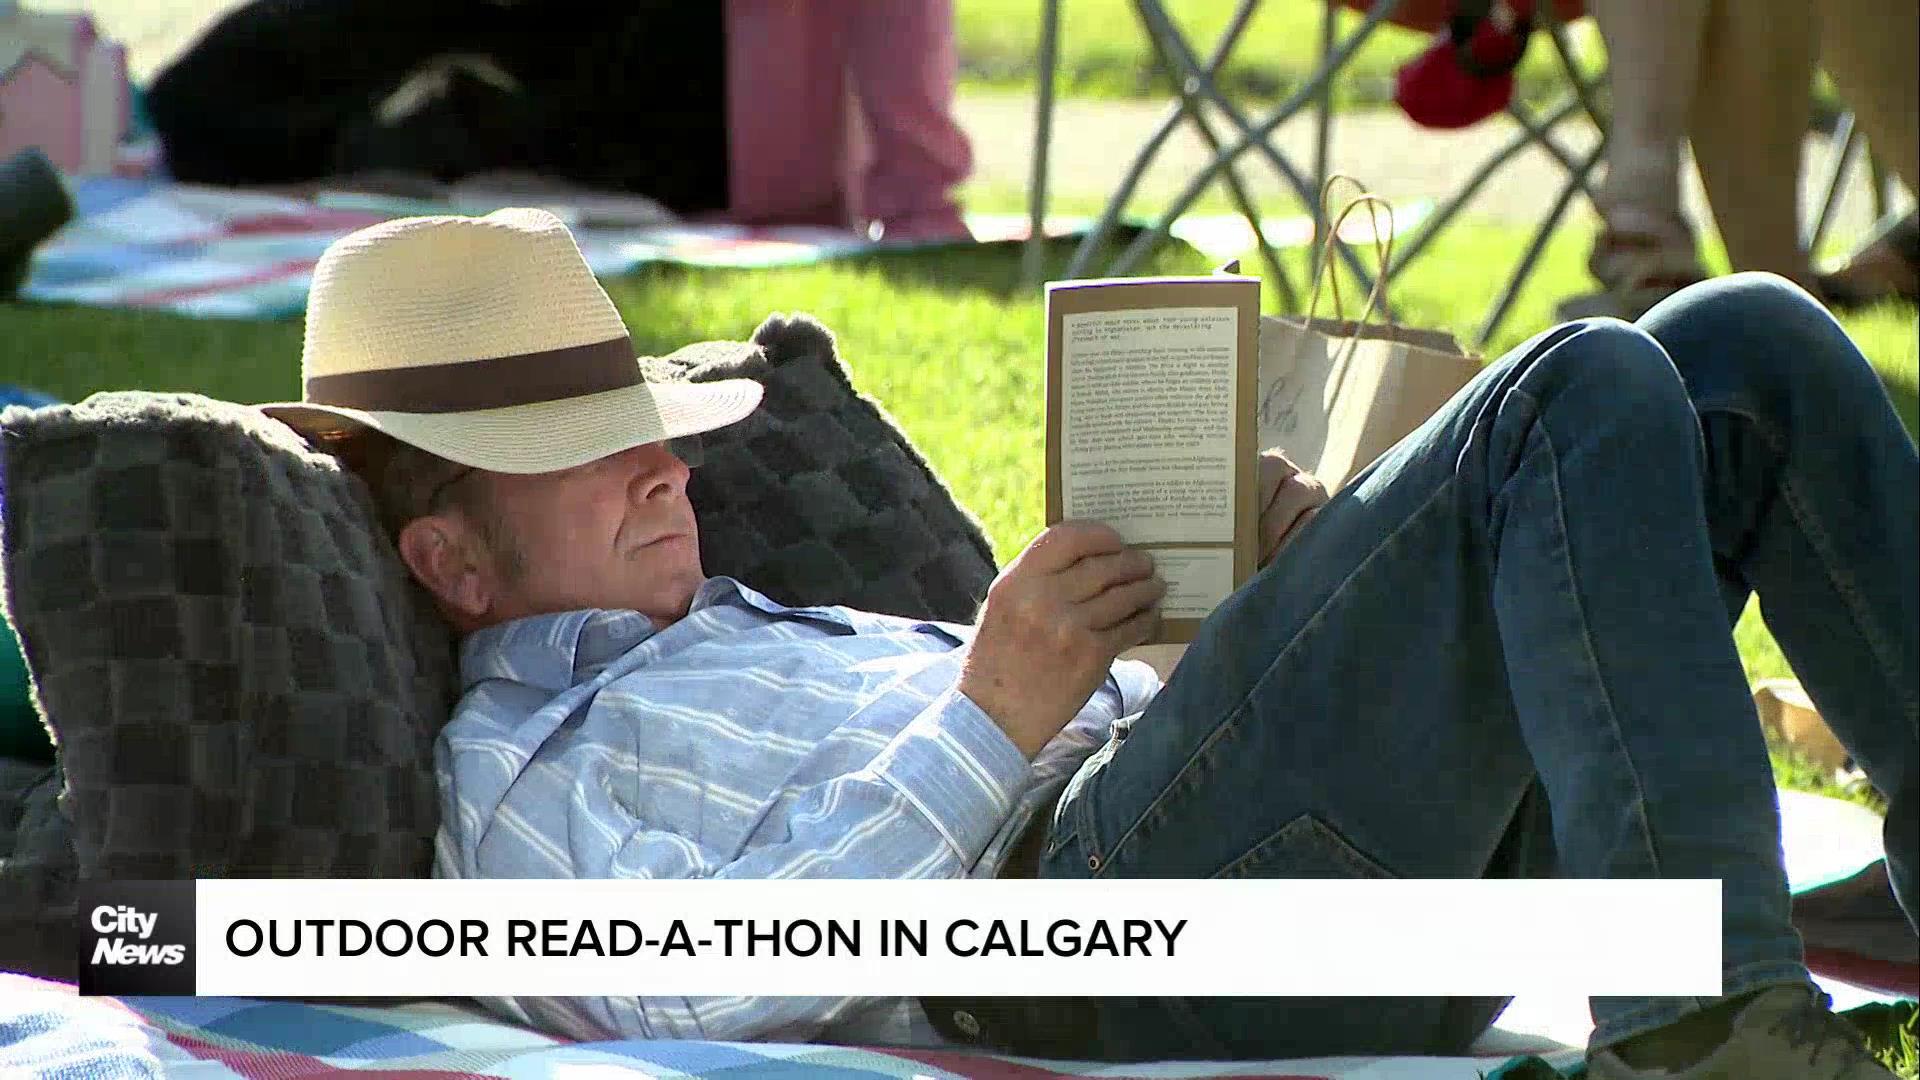 Outdoor read-a-thon in Calgary